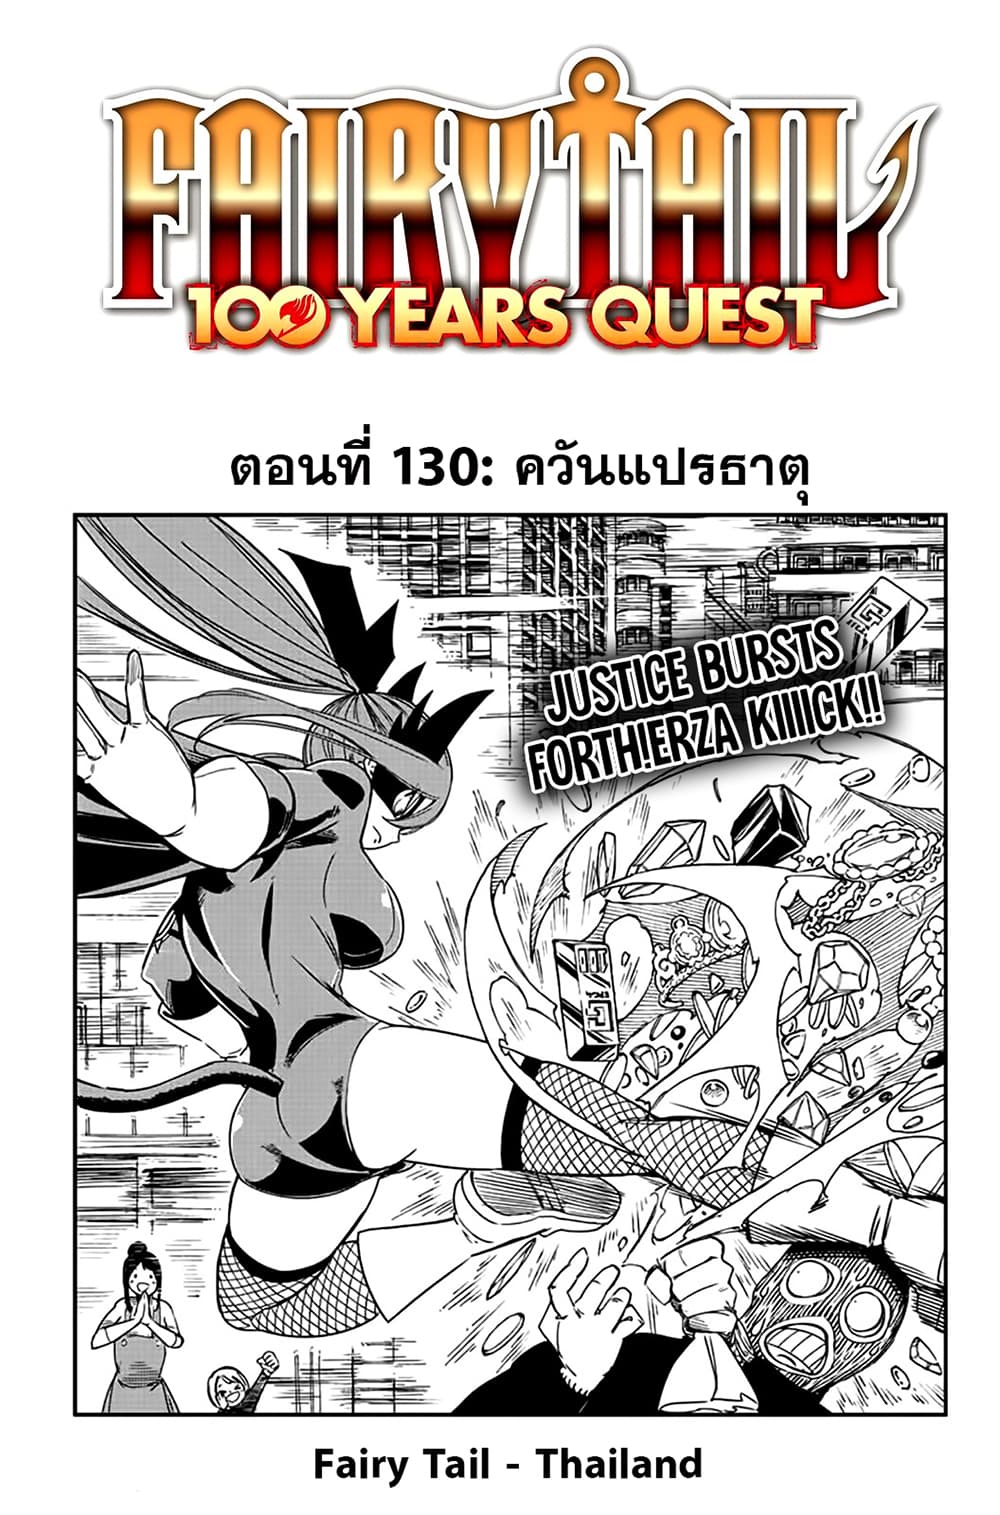 Fairy Tail 100 Years Quest 130 01